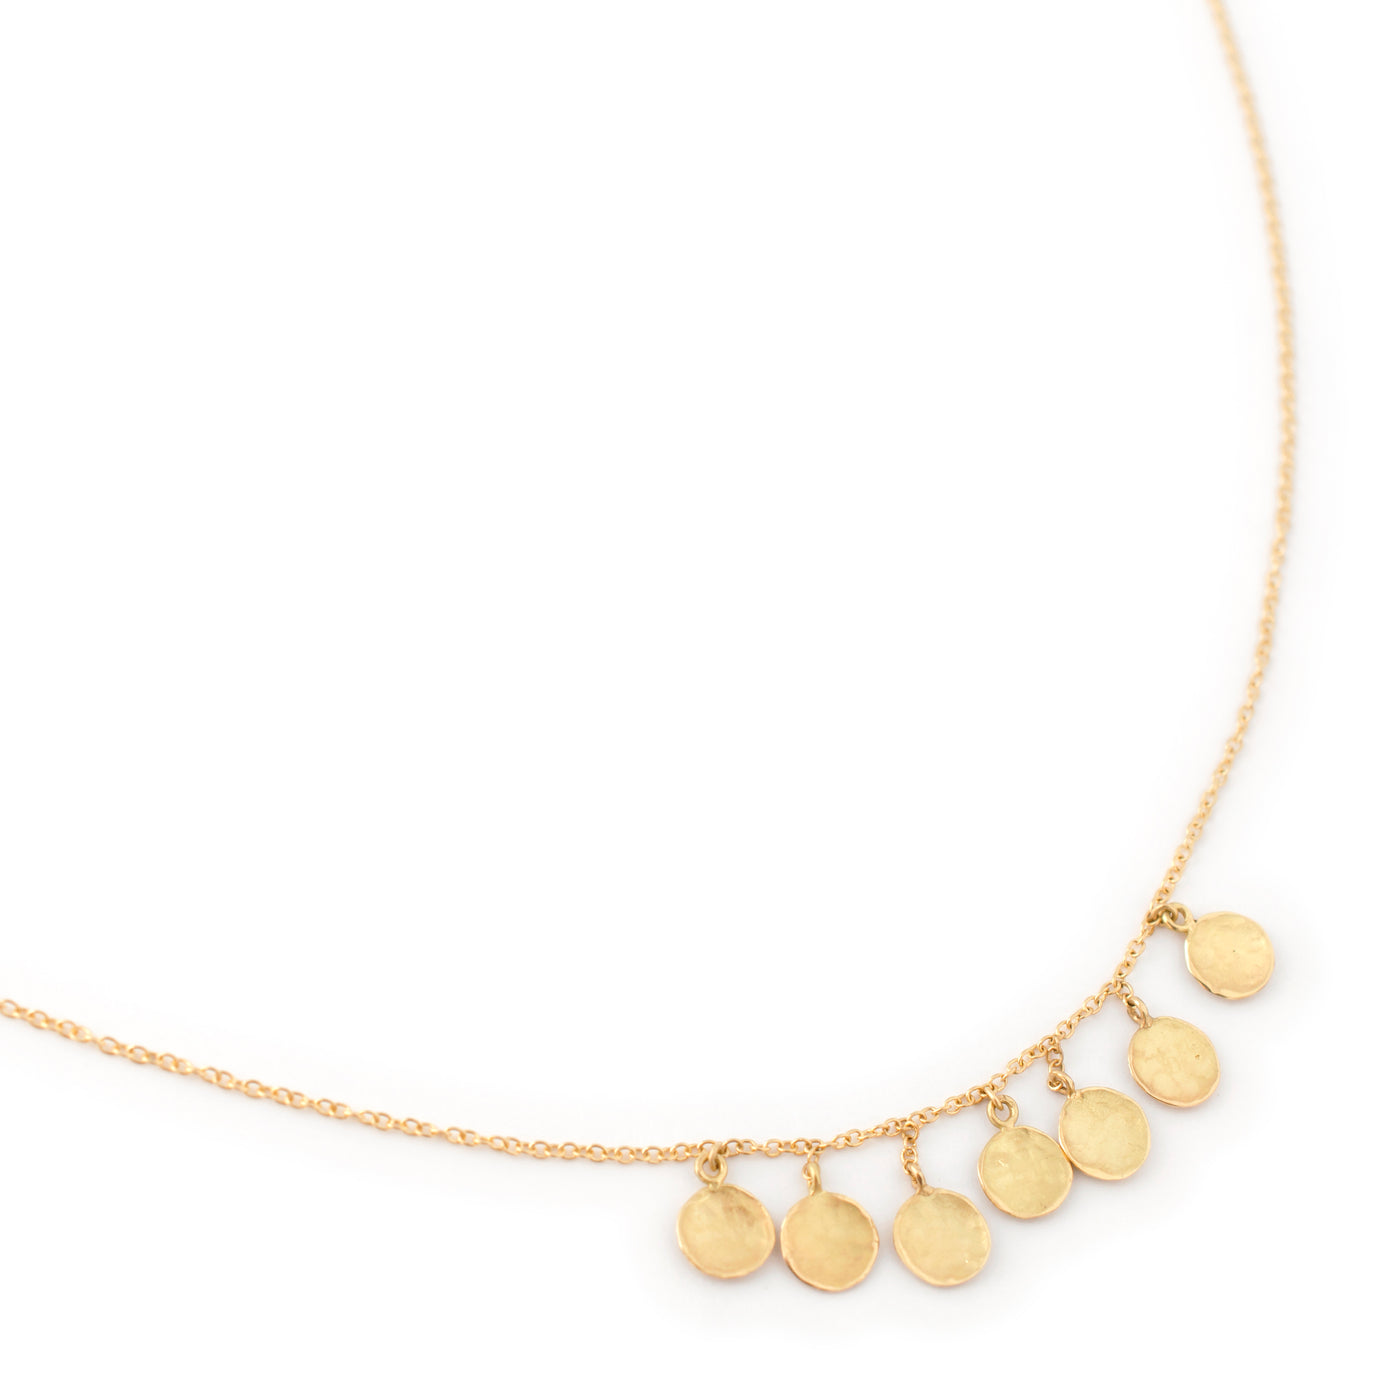 18k yellow gold hammered coin necklace